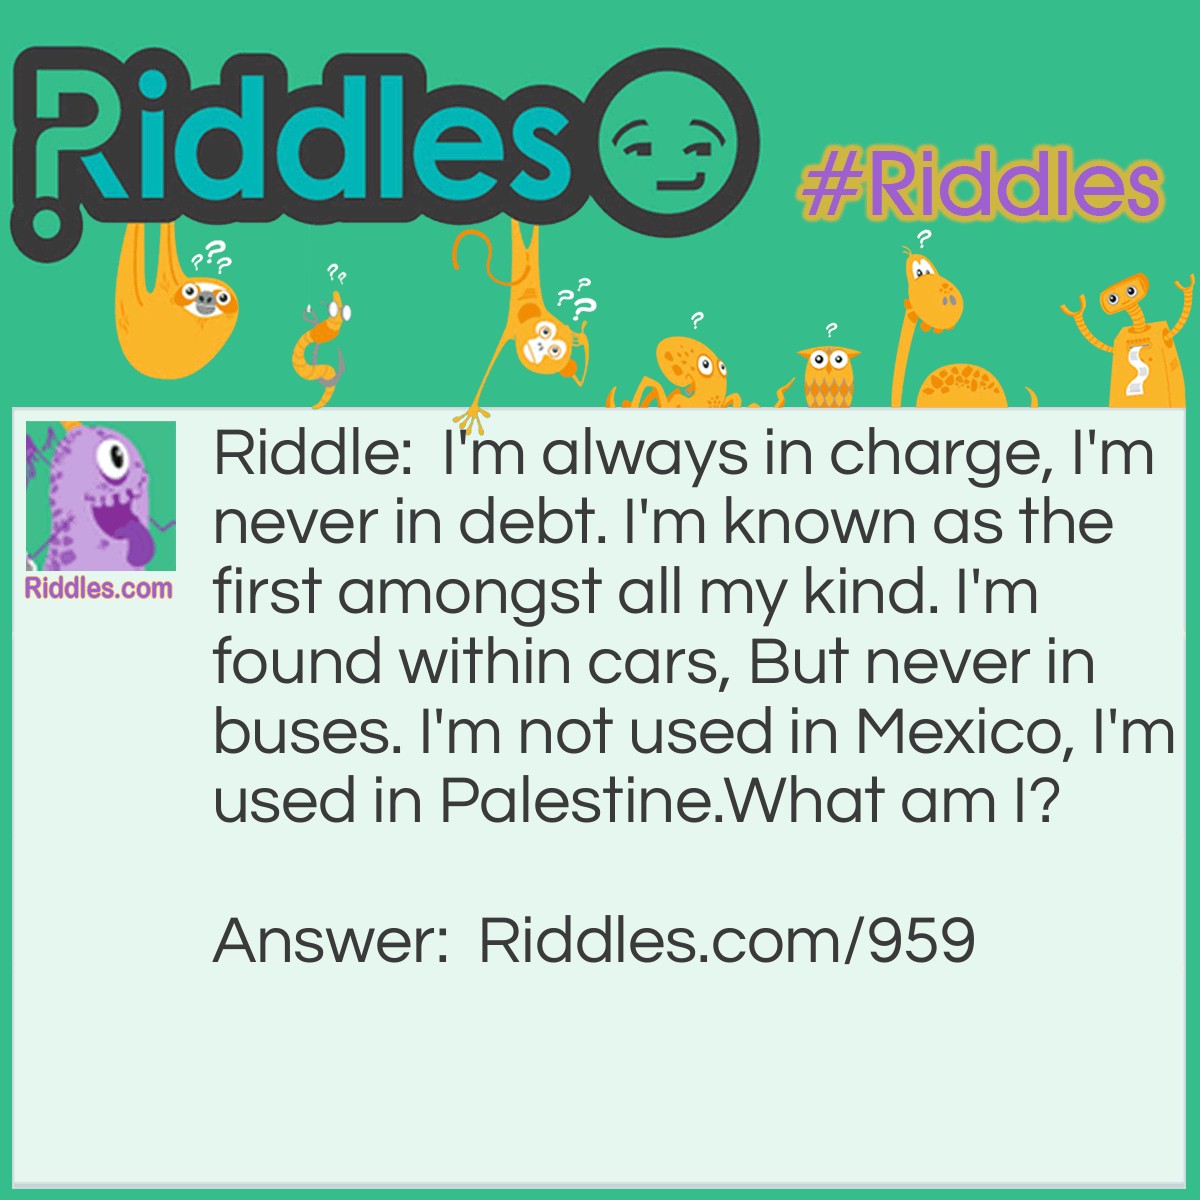 Riddle: I'm always in charge, I'm never in debt. I'm known as the first amongst all my kind. I'm found within cars, But never in buses. I'm not used in Mexico, I'm used in Palestine.
What am I? Answer: The letter A.